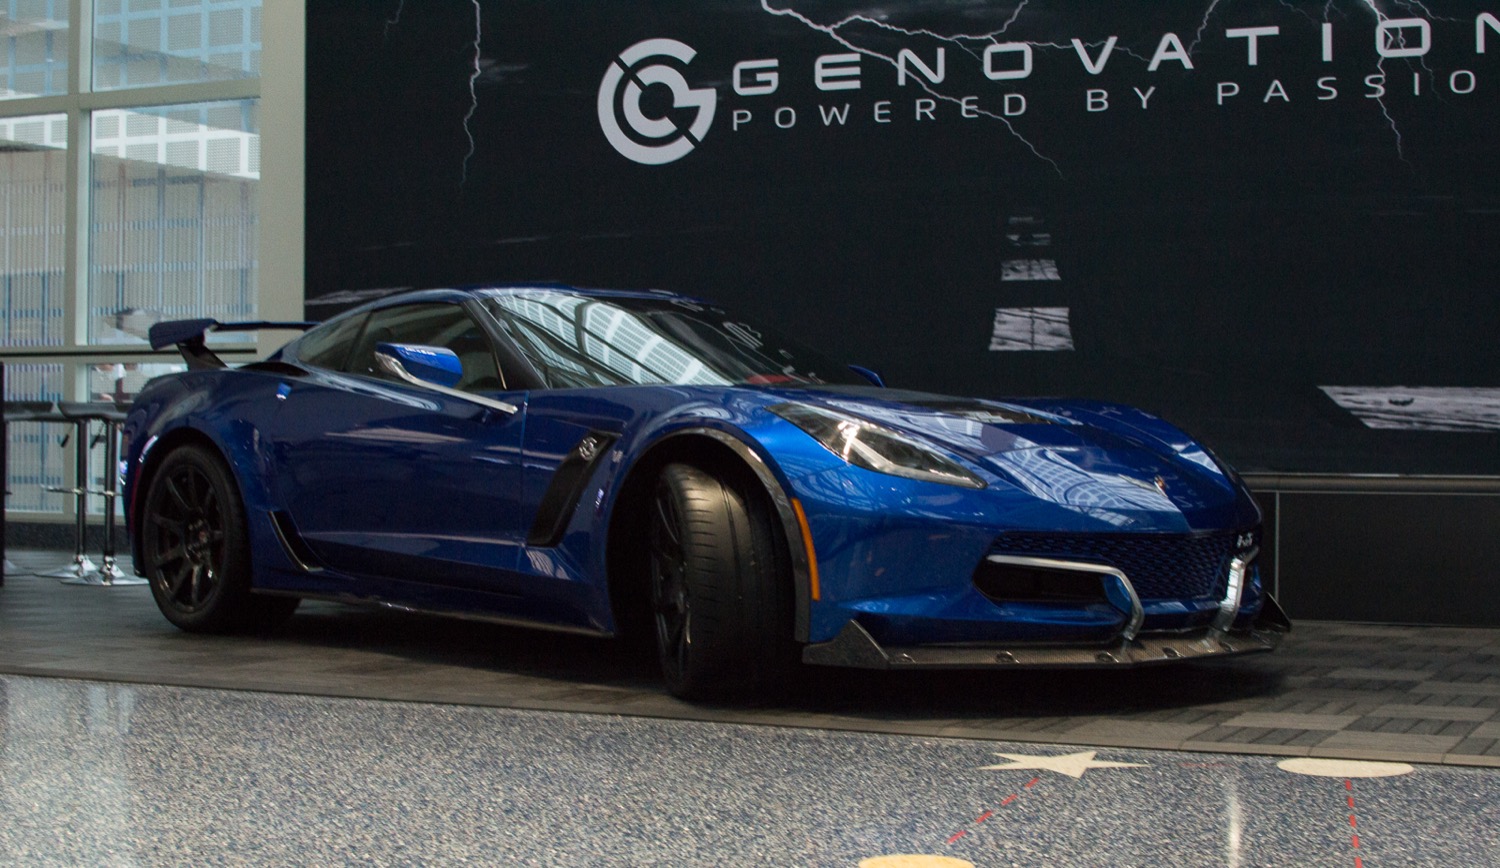 Genovation Gxe Electric Corvette Live Photo Gallery Gm Authority